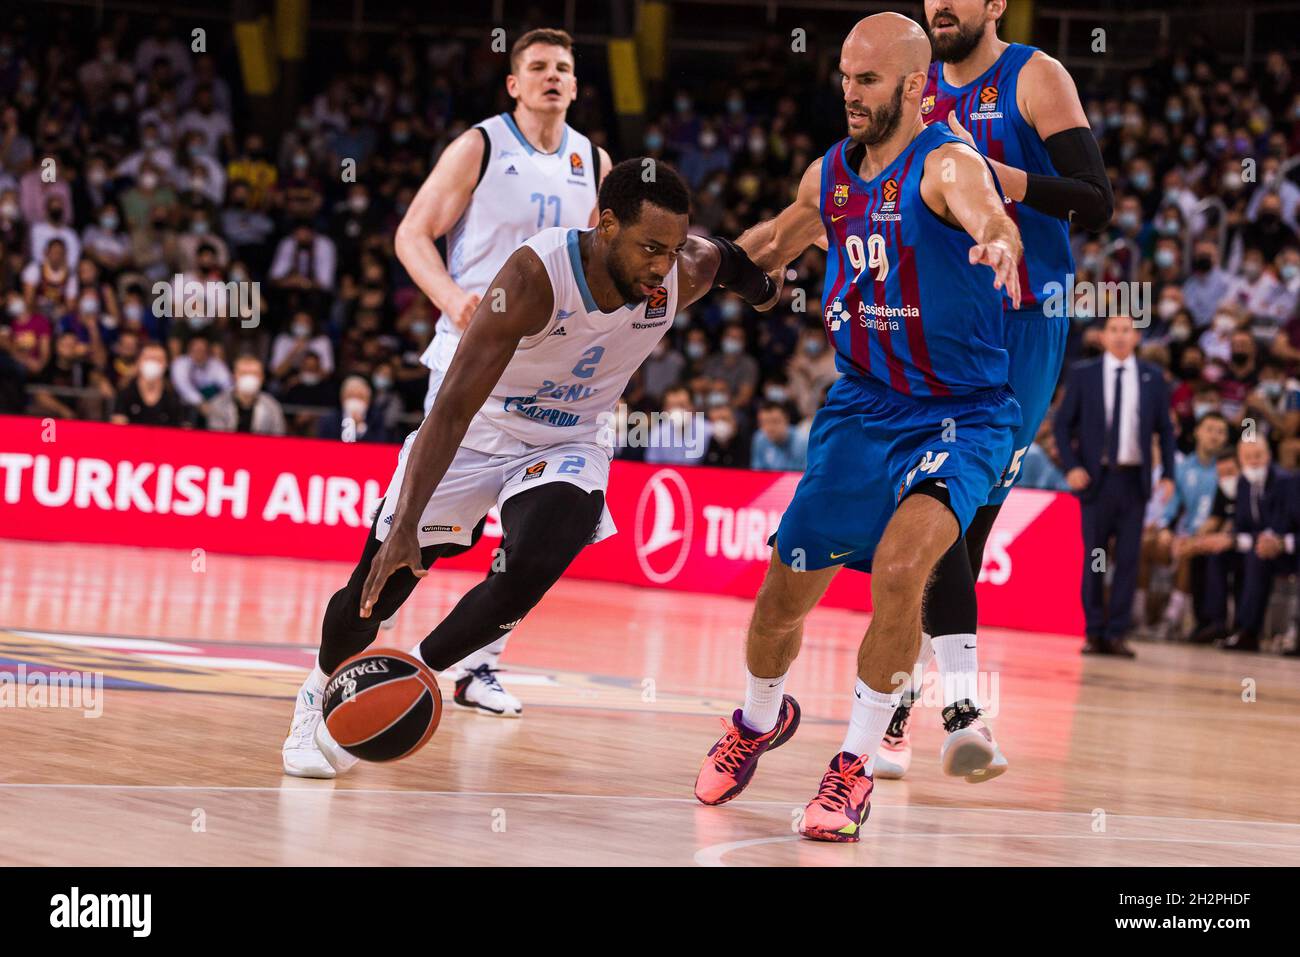 Jordan Loyd of Zenit St Petersburg in action Nick Calathes of FC Barcelona  during the Turkish Airlines EuroLeague basketball match between FC Barcelona  and Zenit St Petersburg on October 22, 2021 at